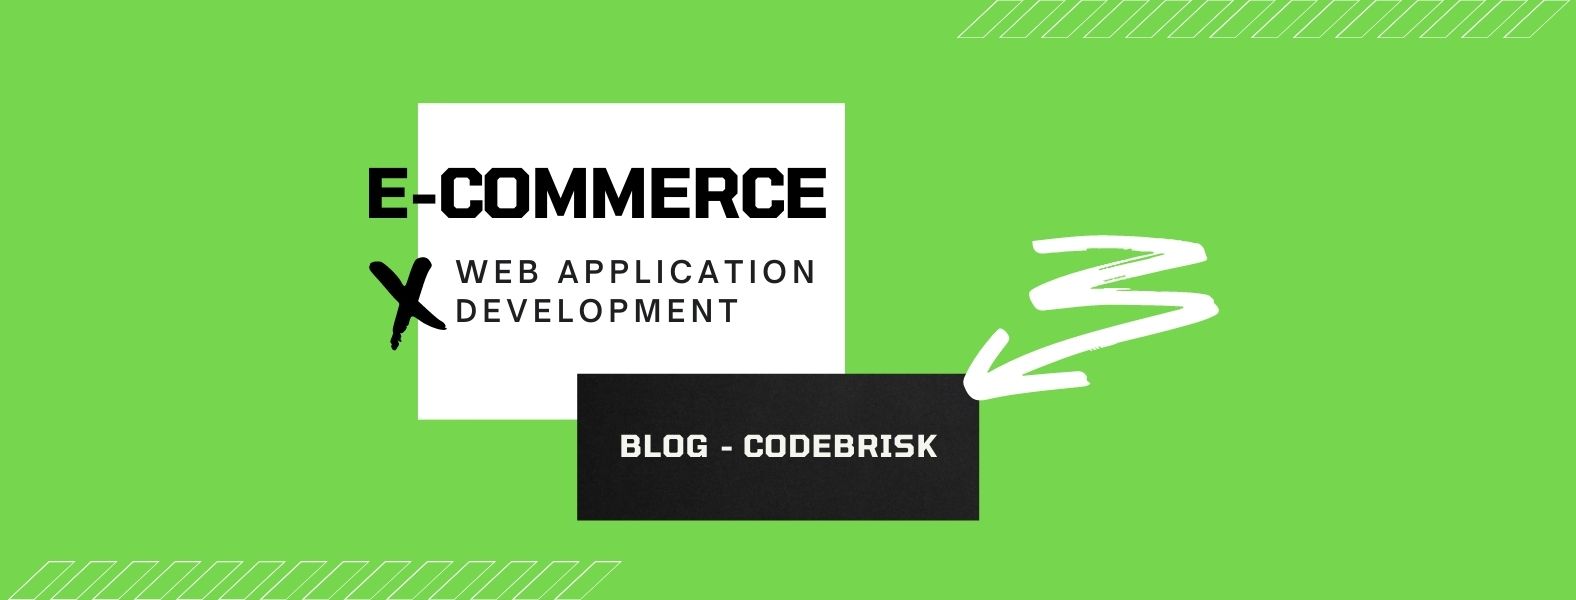 Why Should You Develop an E-commerce Web Application